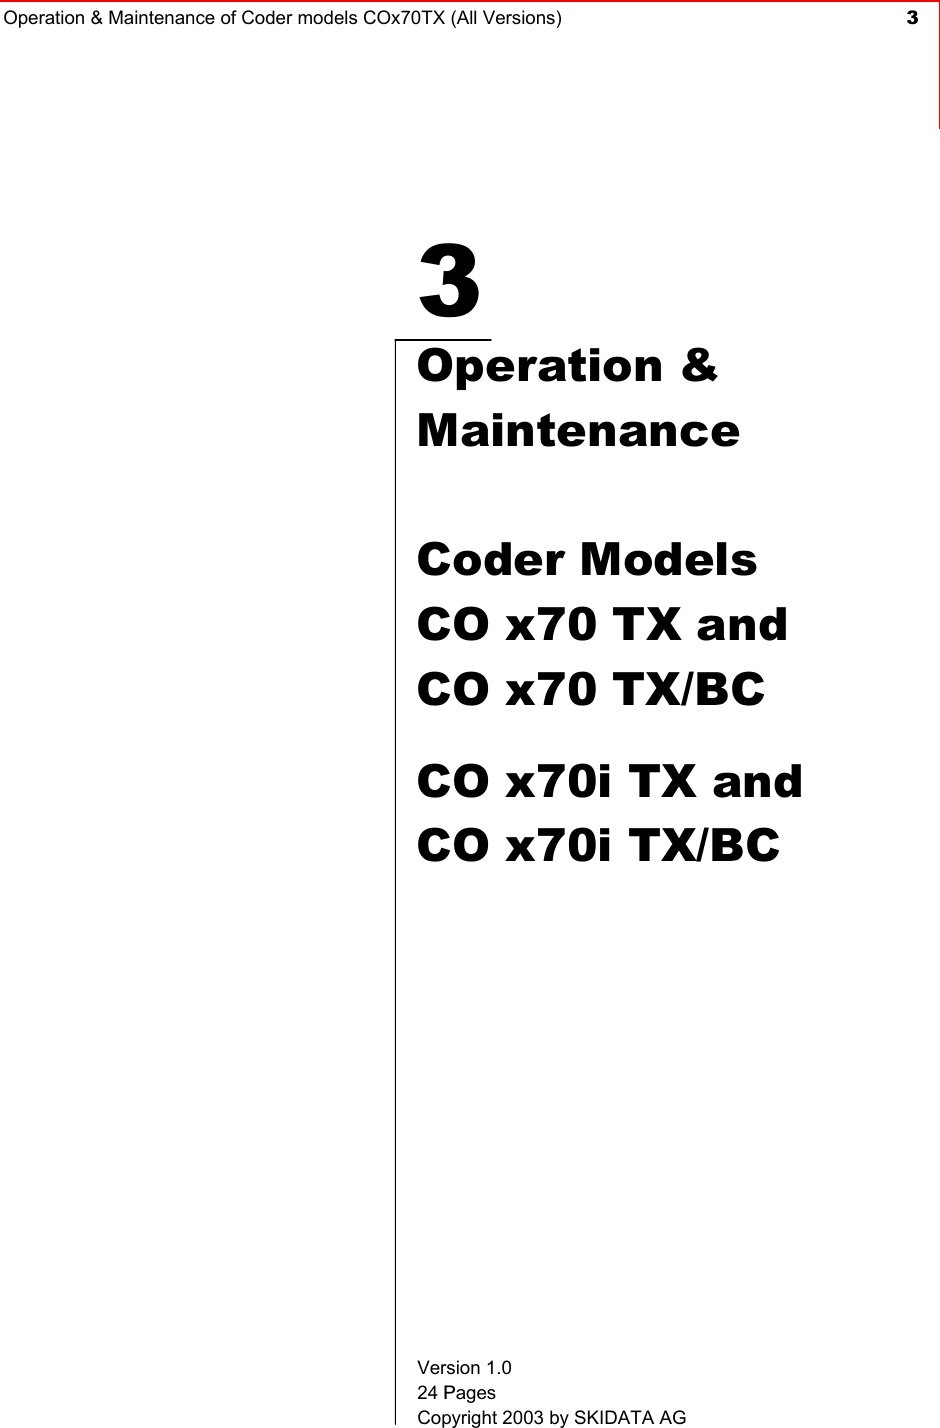 Operation &amp; Maintenance of Coder models COx70TX (All Versions)  3     3   Operation &amp;  Maintenance  Coder Models   CO x70 TX and  CO x70 TX/BC  CO x70i TX and  CO x70i TX/BC          Version 1.0 24 Pages Copyright 2003 by SKIDATA AG 